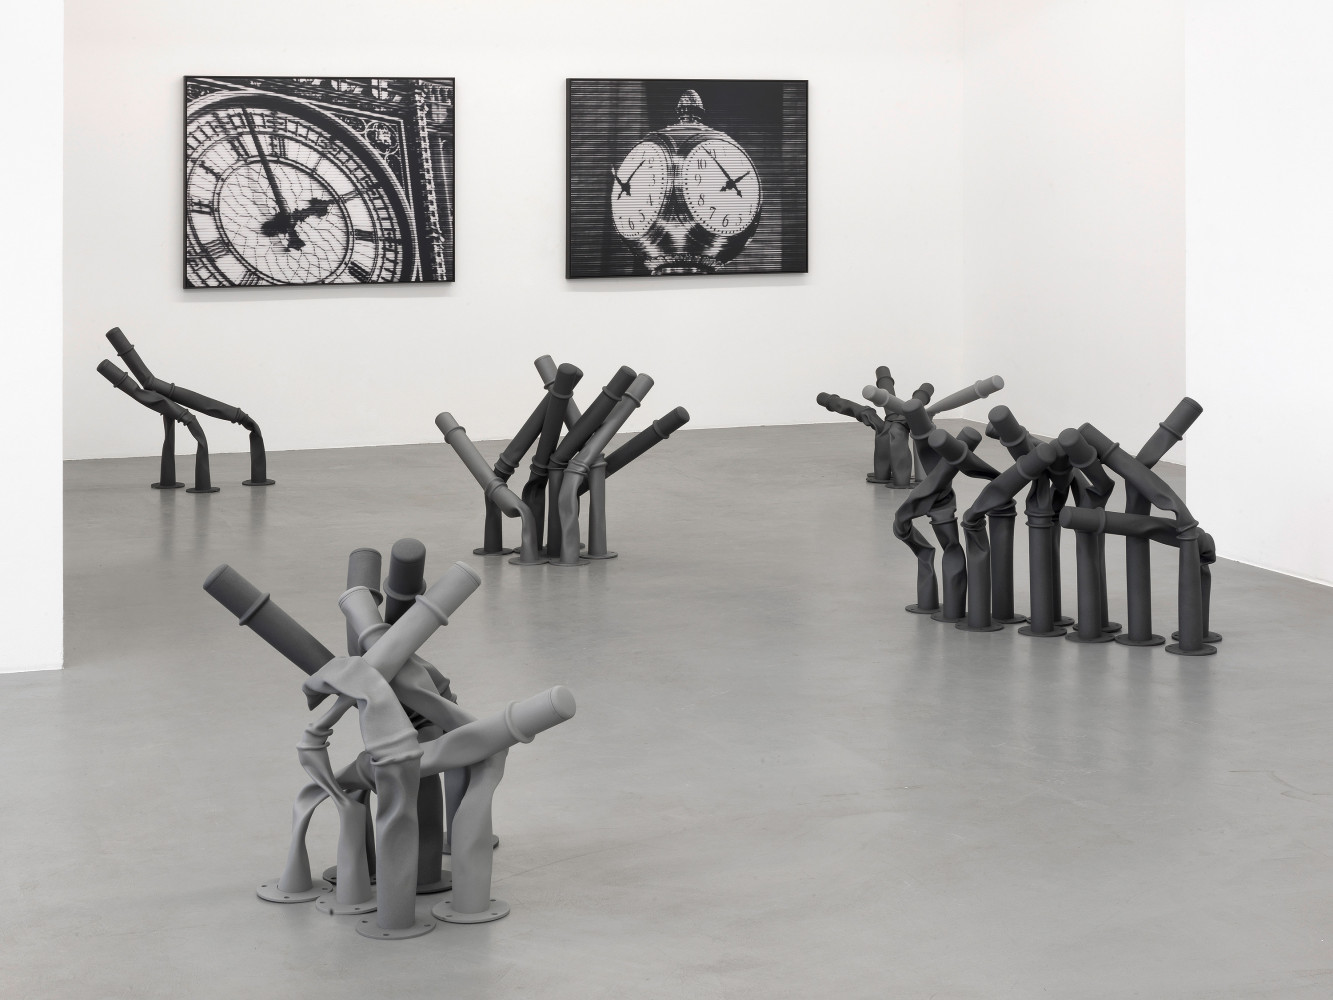 Bettina Pousttchi, ‘Off the Clock’, Installation view, Buchmann Galerie, 2013